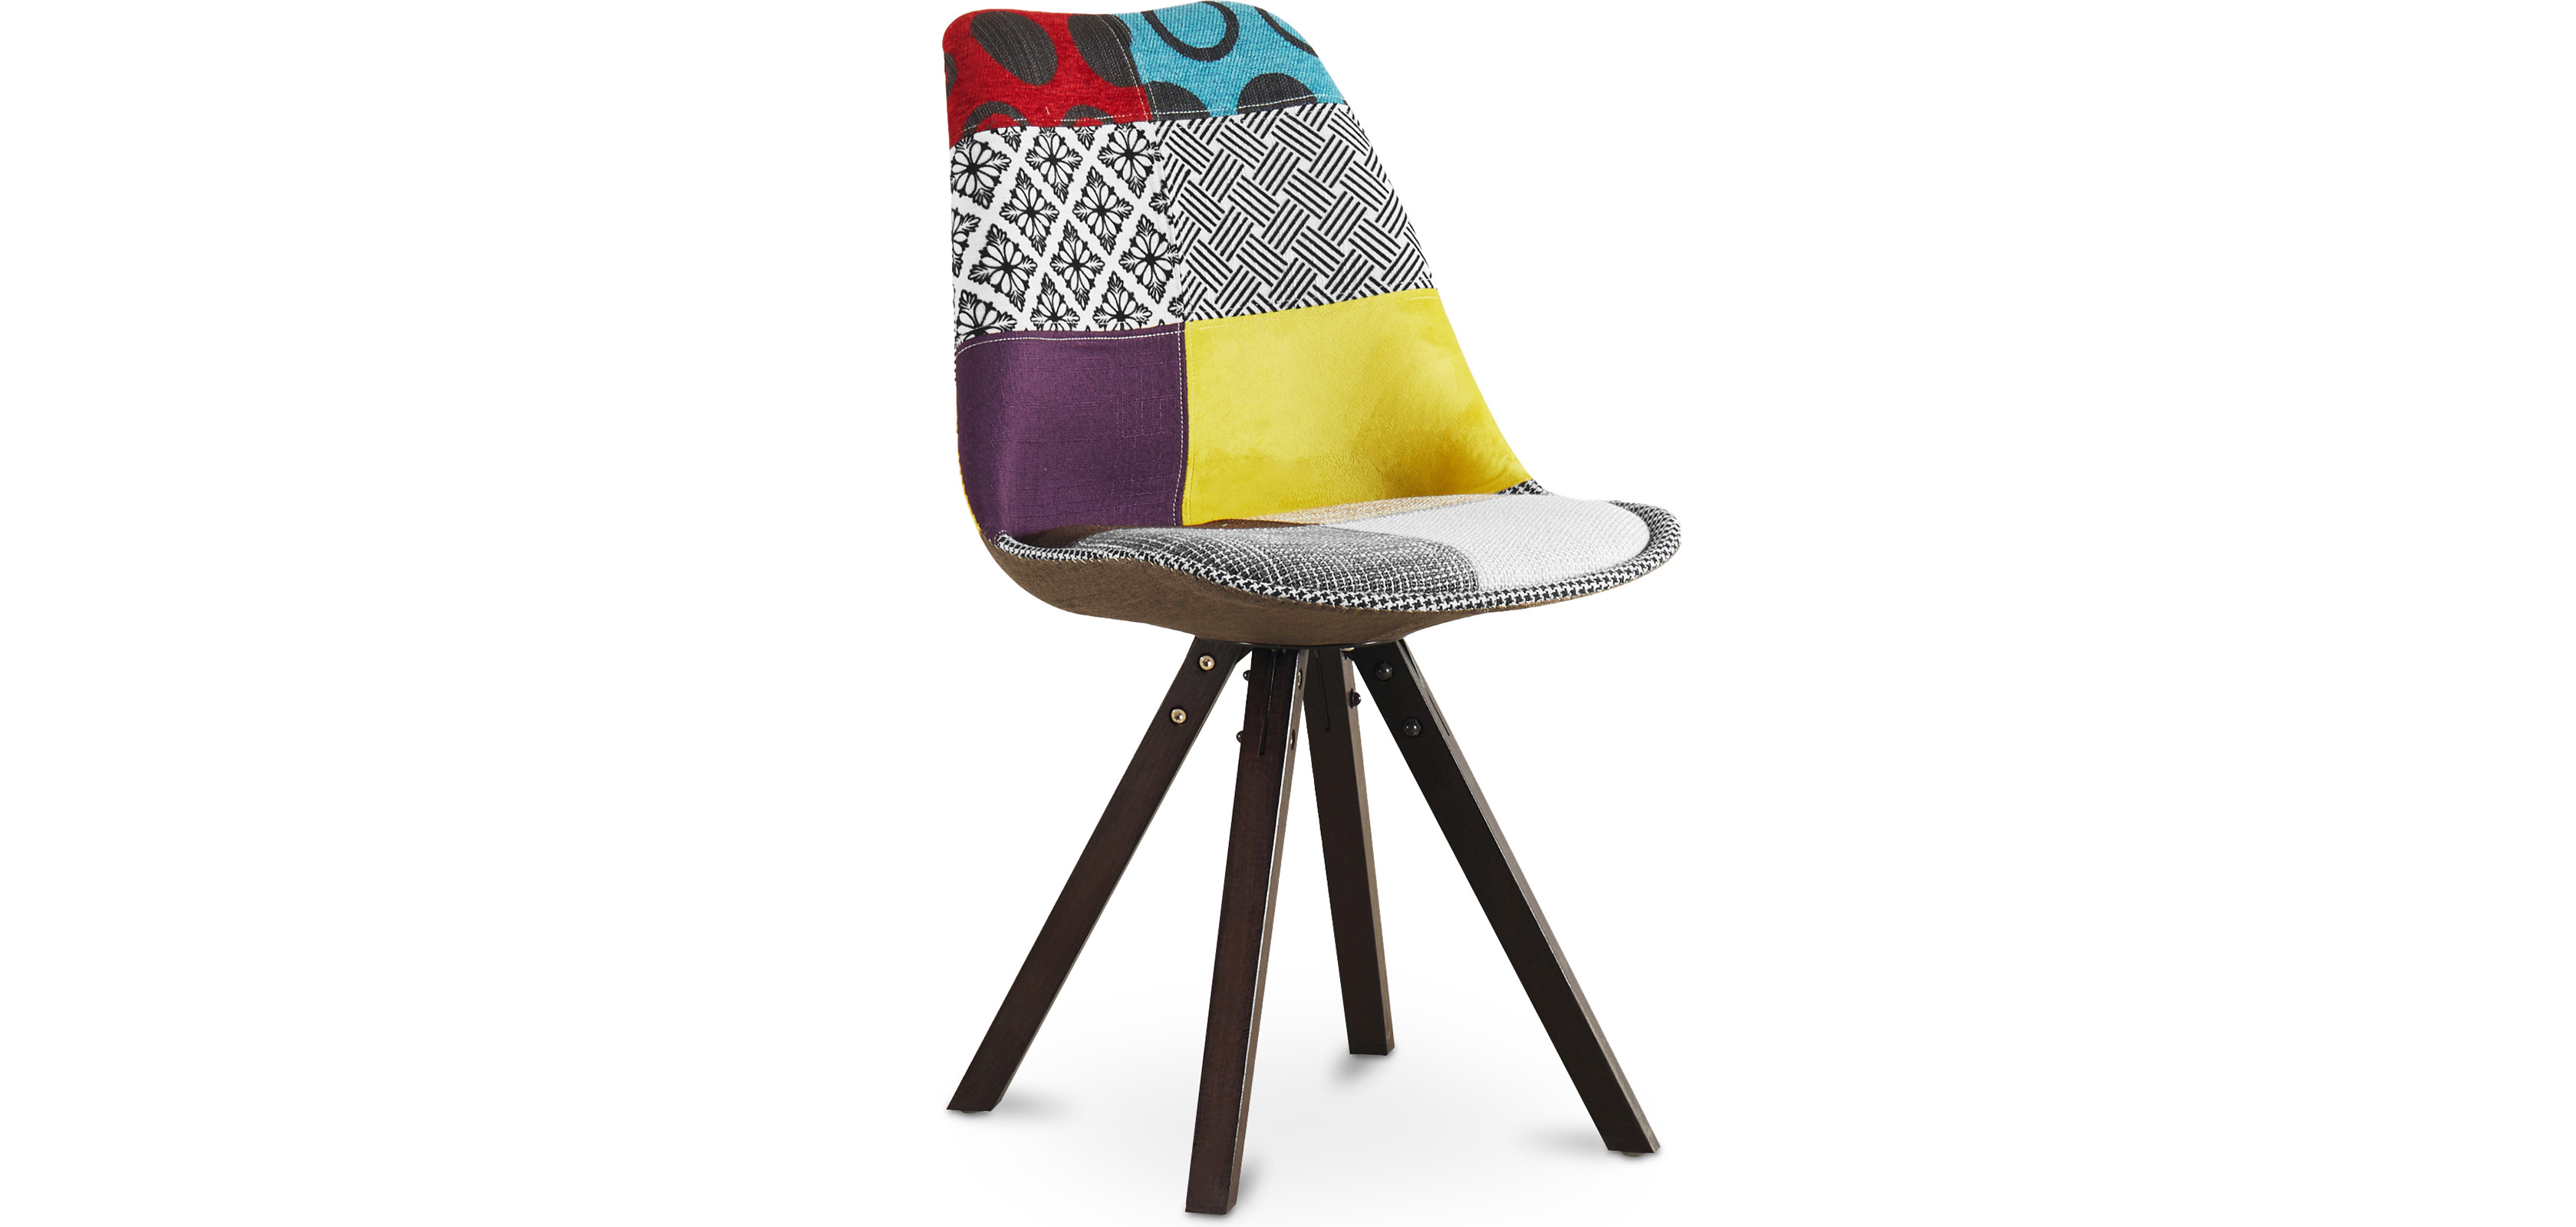 Buy Dining Chair Brielle Upholstered Scandi Design Dark Wooden Legs Premium - Patchwork Jay Multicolour 59957 - in the UK